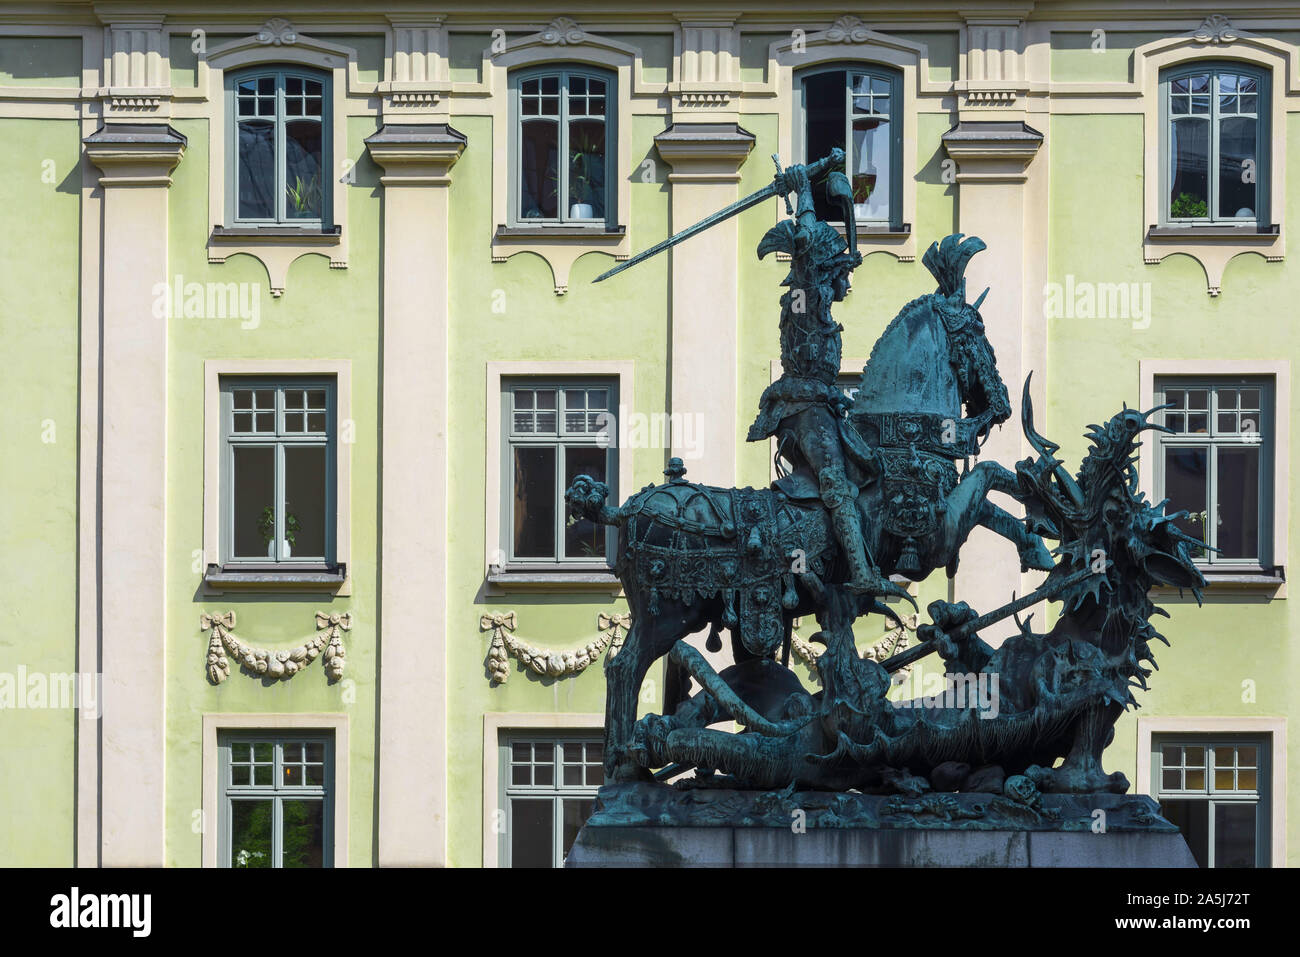 St George and dragon, view of a statue of St George slaying a dragon sited in the Old Town (Gamla Stan) area of Stockholm, Sweden. Stock Photo